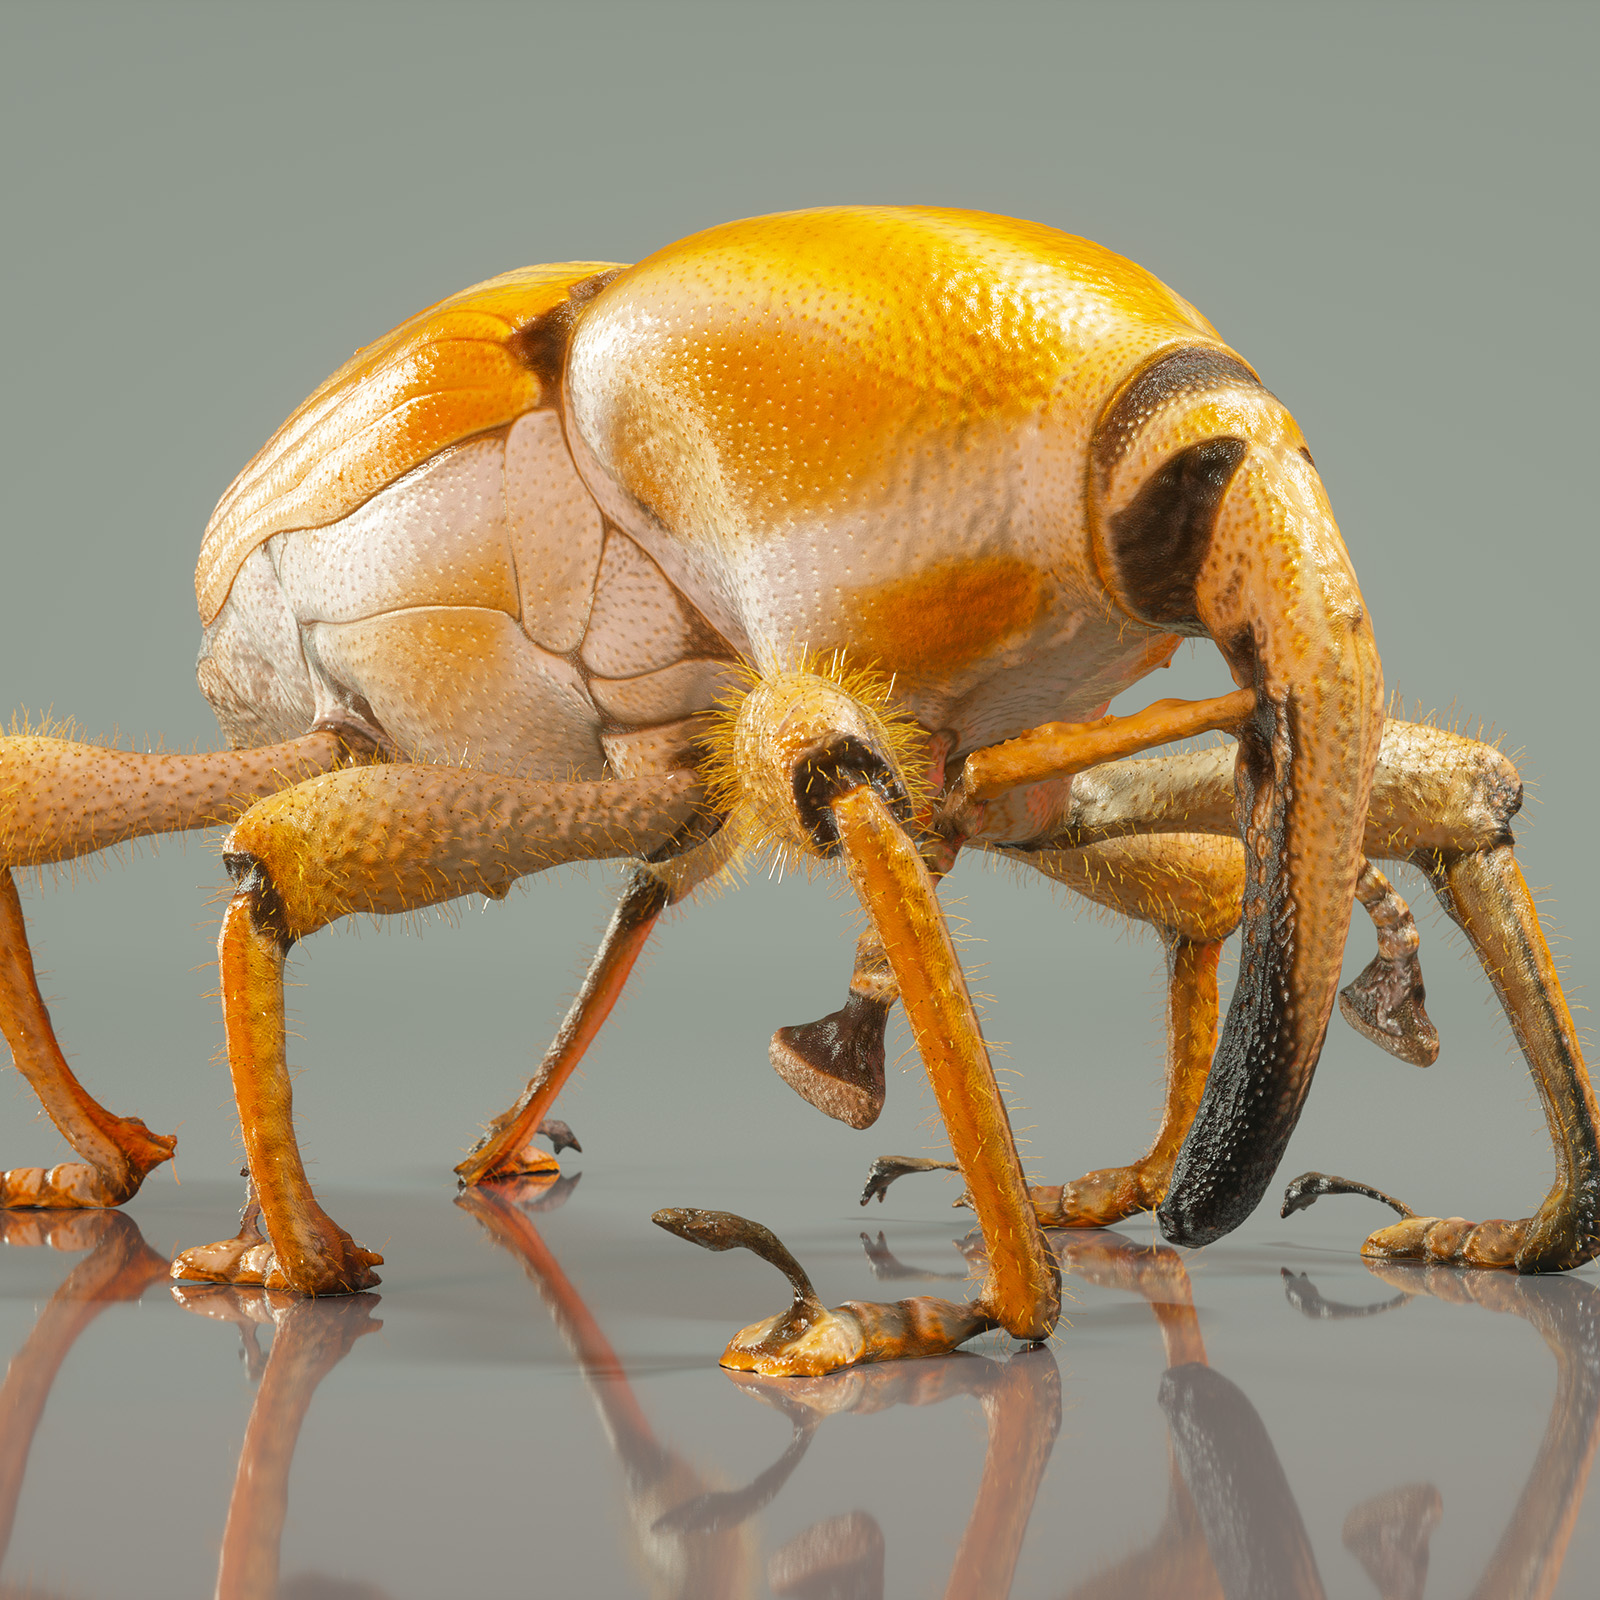 Who's into 3D scanning insects? | The Insect Collectors' Forum